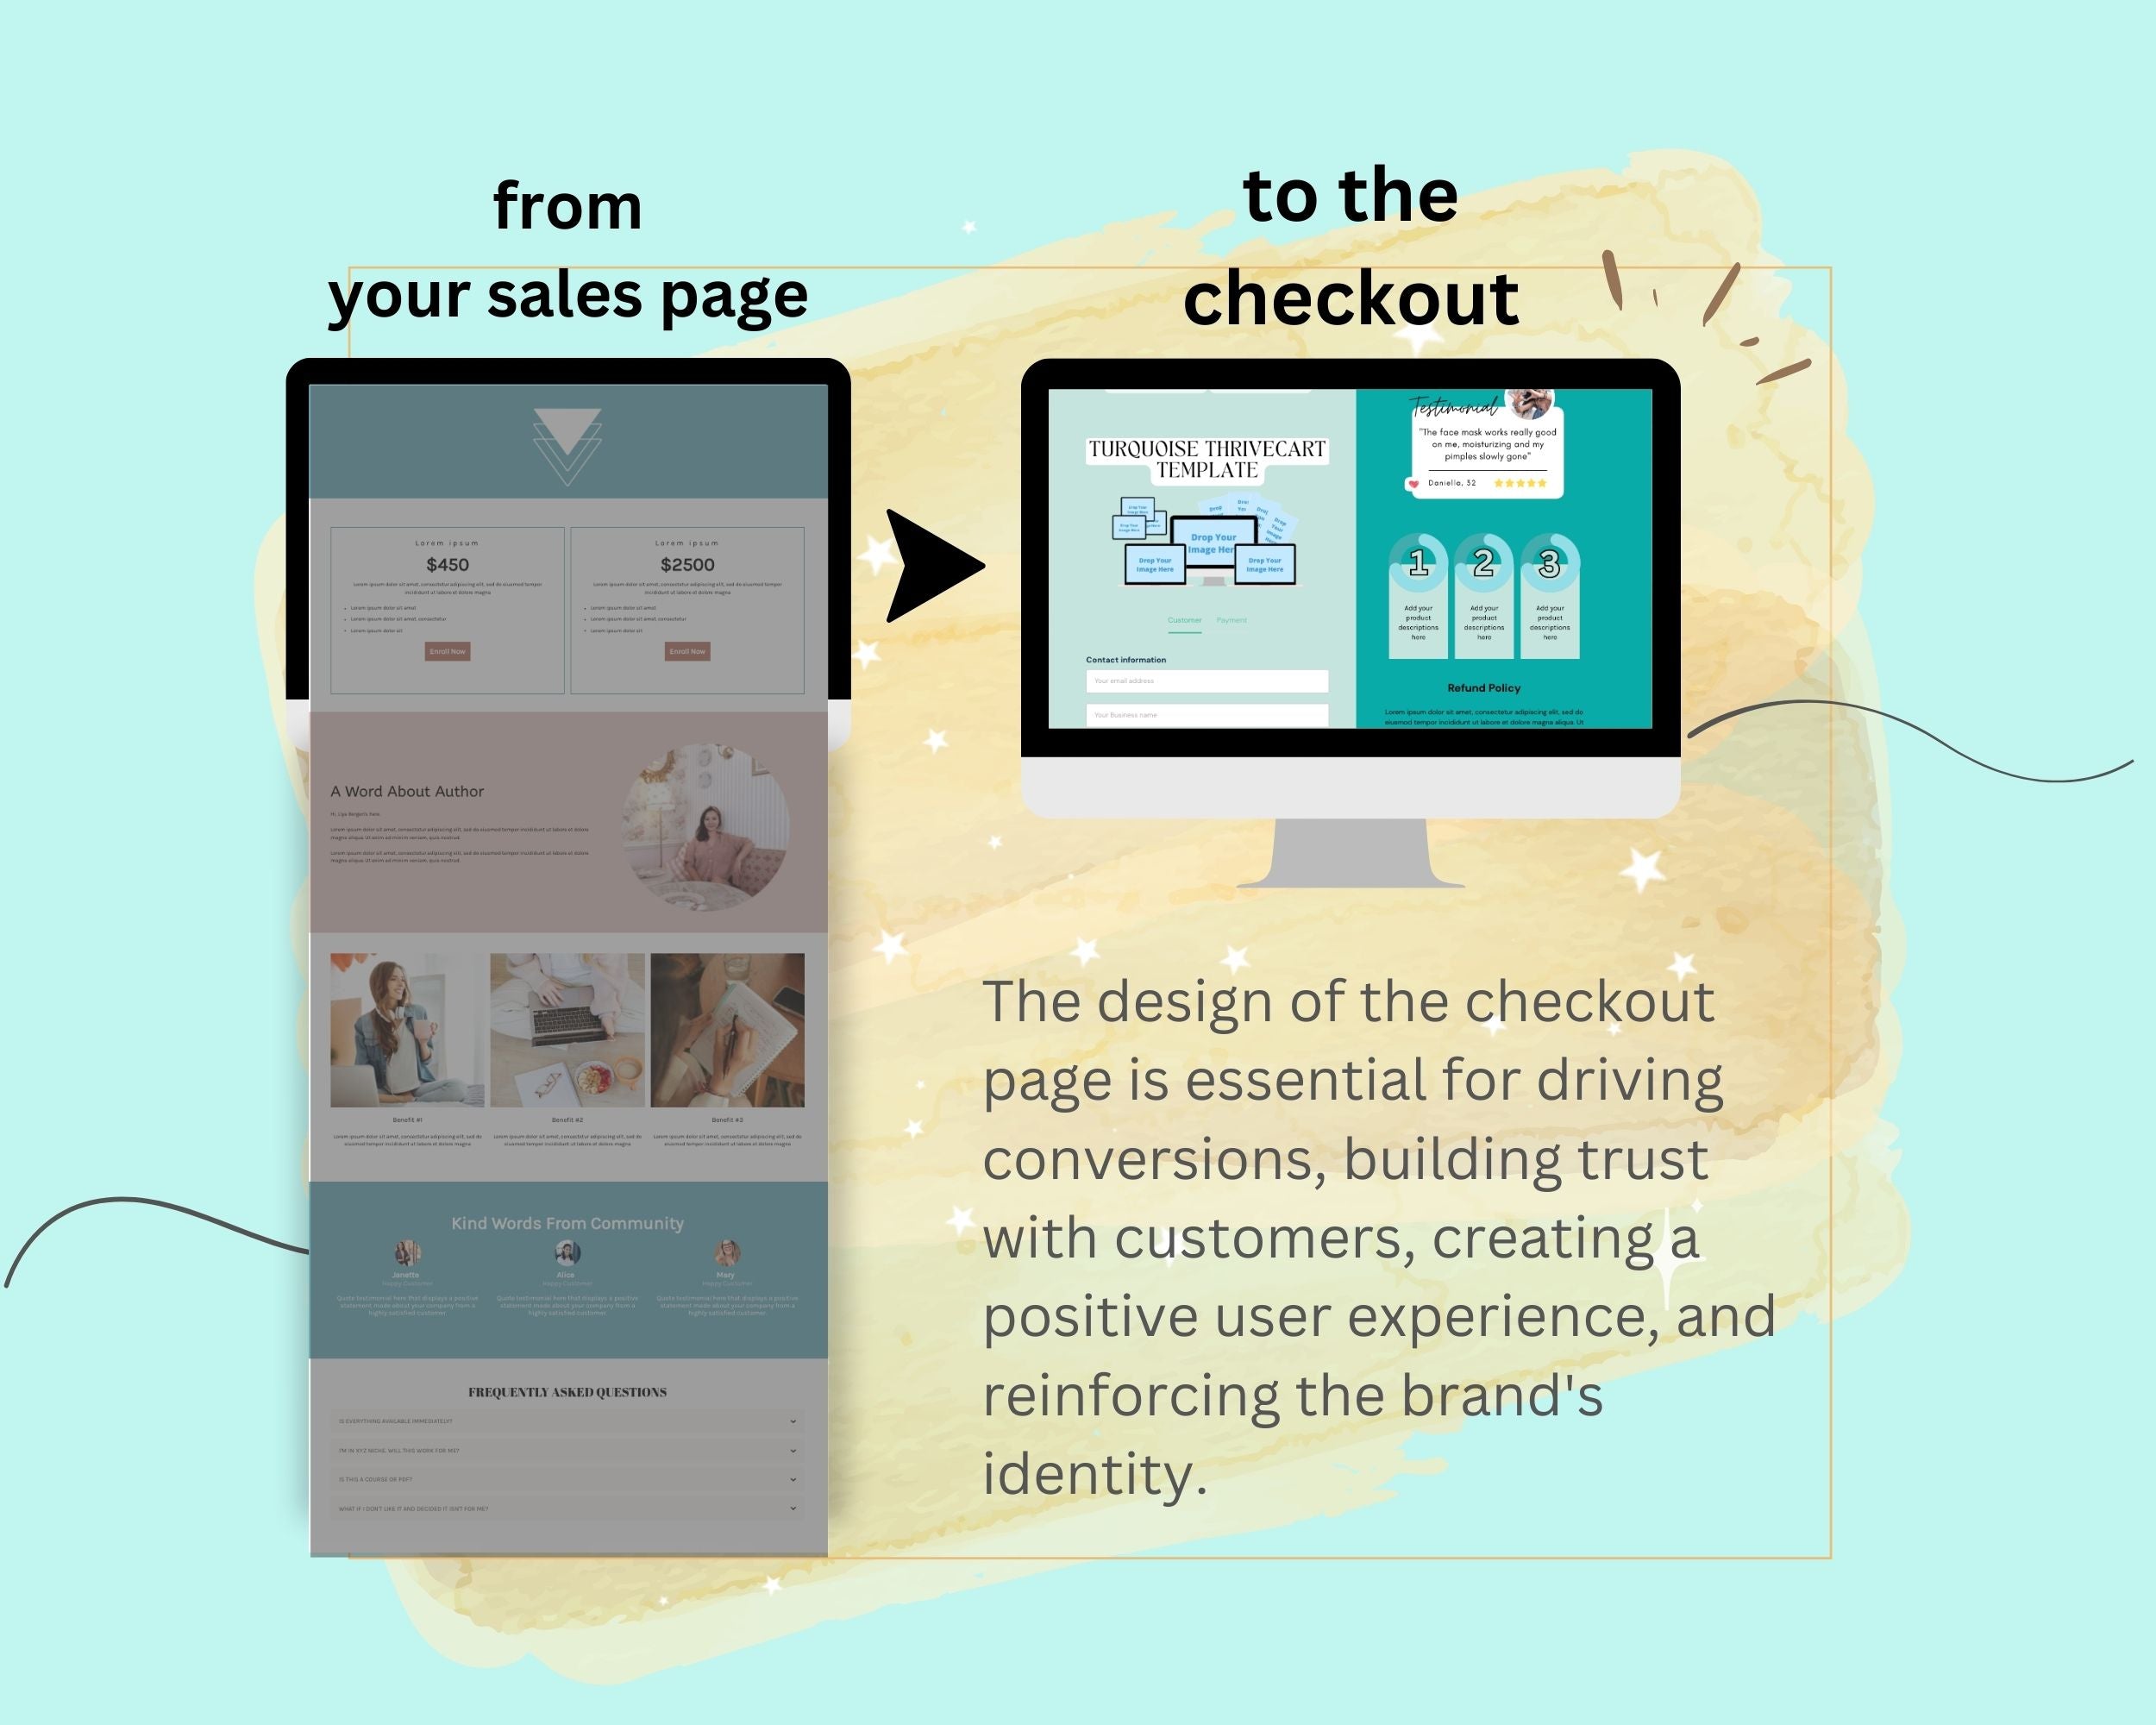 Turquoise Checkout Page ThriveCart Template